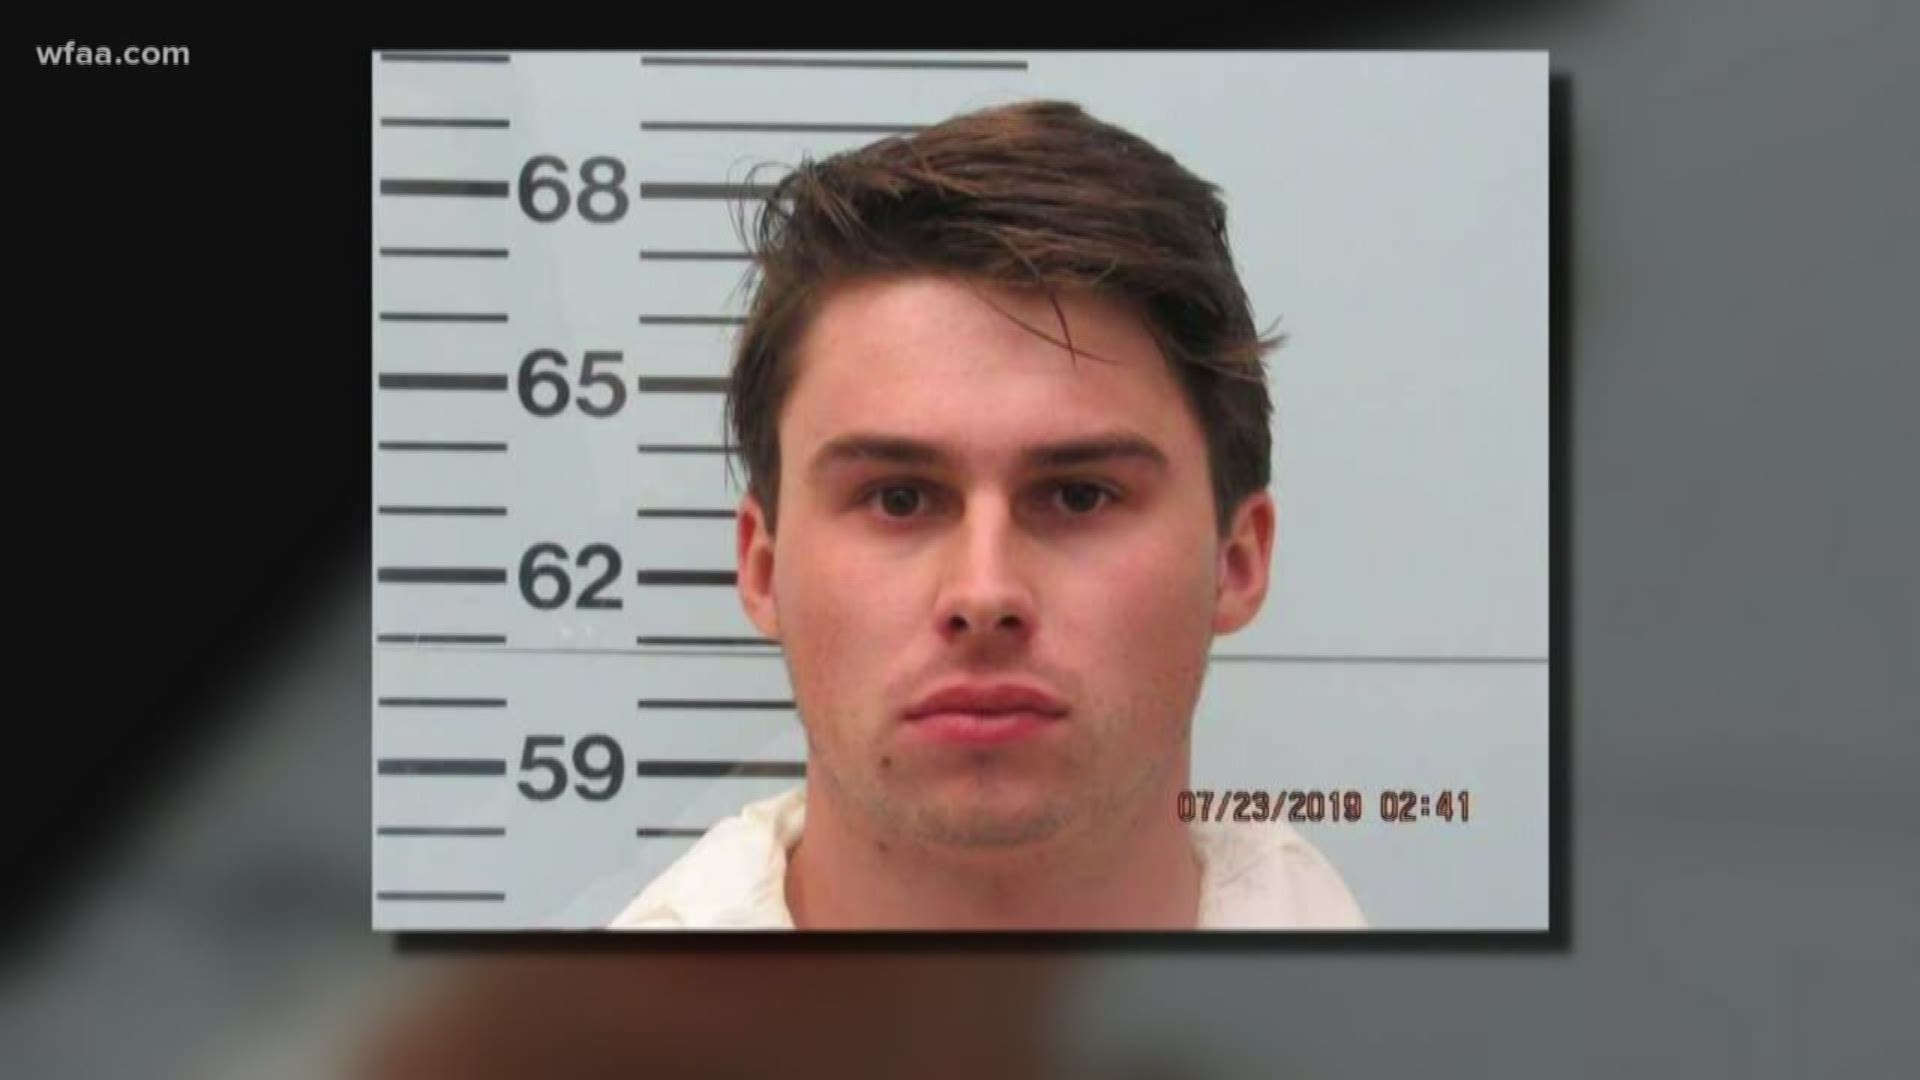 Deputies say Brandon Theesfeld, 22, has been arrested and charged with murder in connection to 21-year-old Alexandria "Ally" Kostial's death.